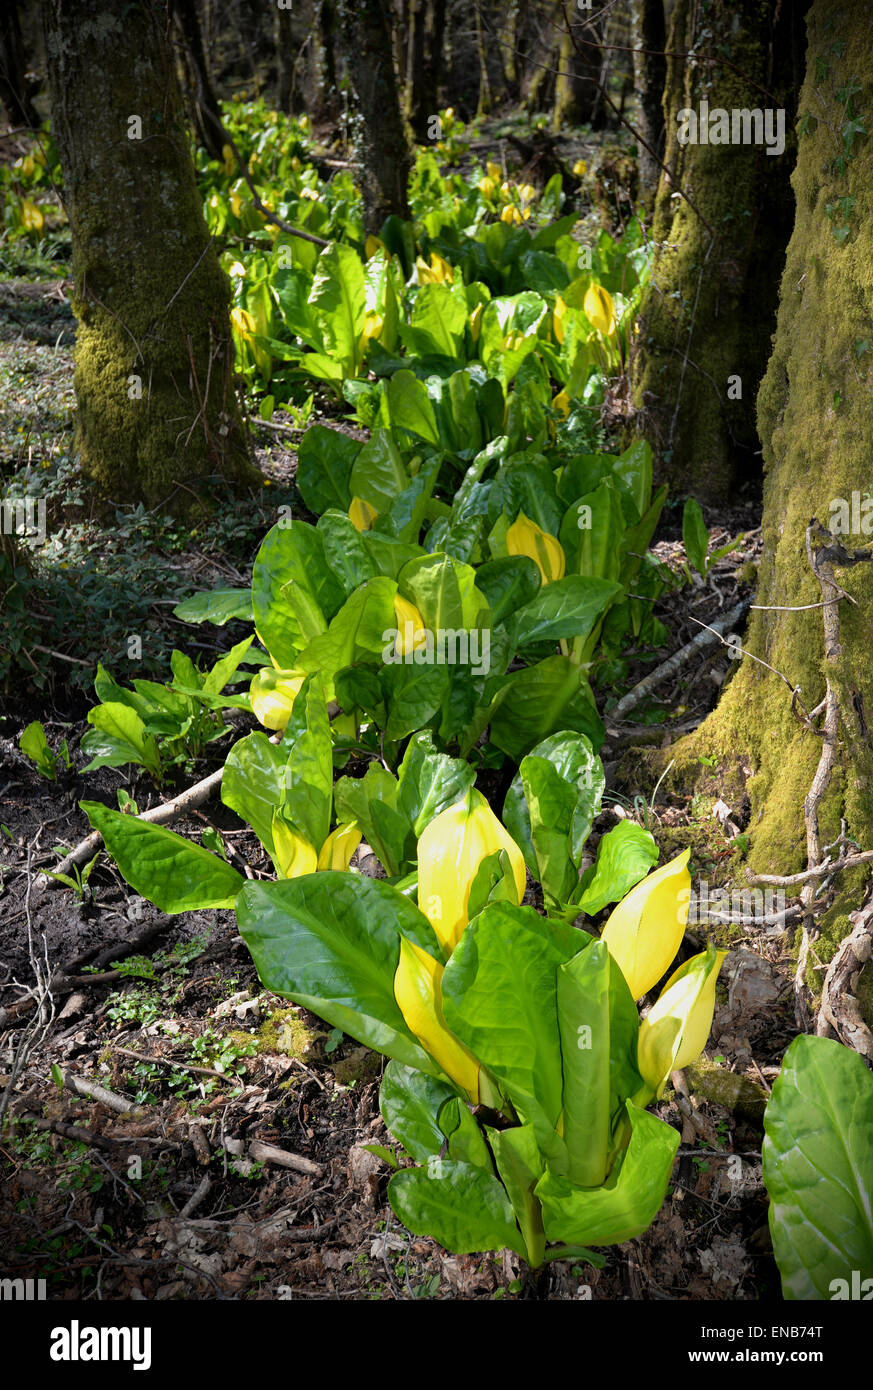 Yellow Skunk cabbage (Lysichiton Americanus) growing in a marshy area in South Devon, UK. Also known as American Skunk Cabbage. Stock Photo